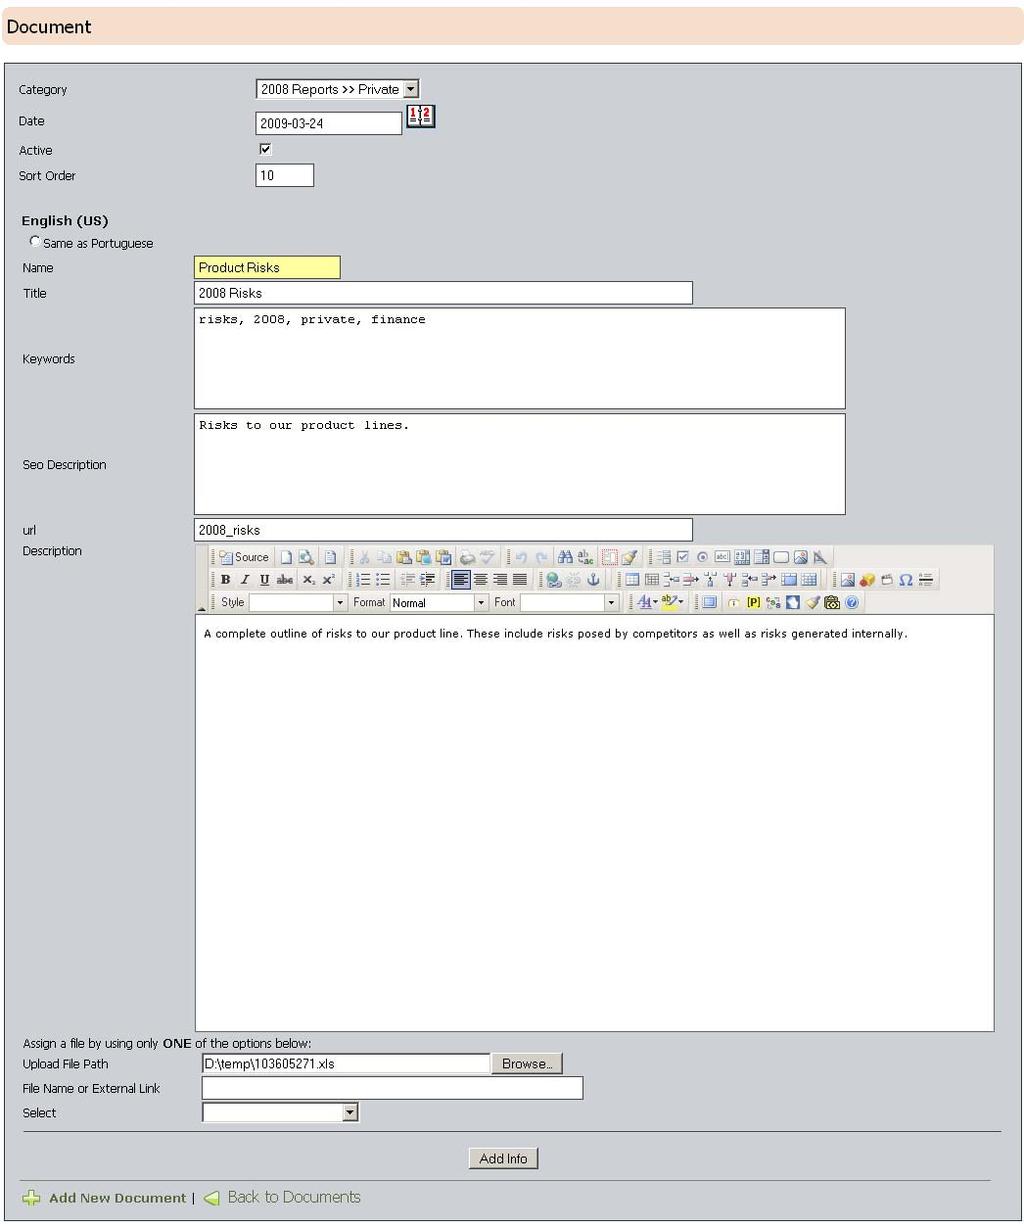 Figure 4-2 Document Detail Page 2) Click Add New Document. The Document Detail Page (Figure 4-2) opens.